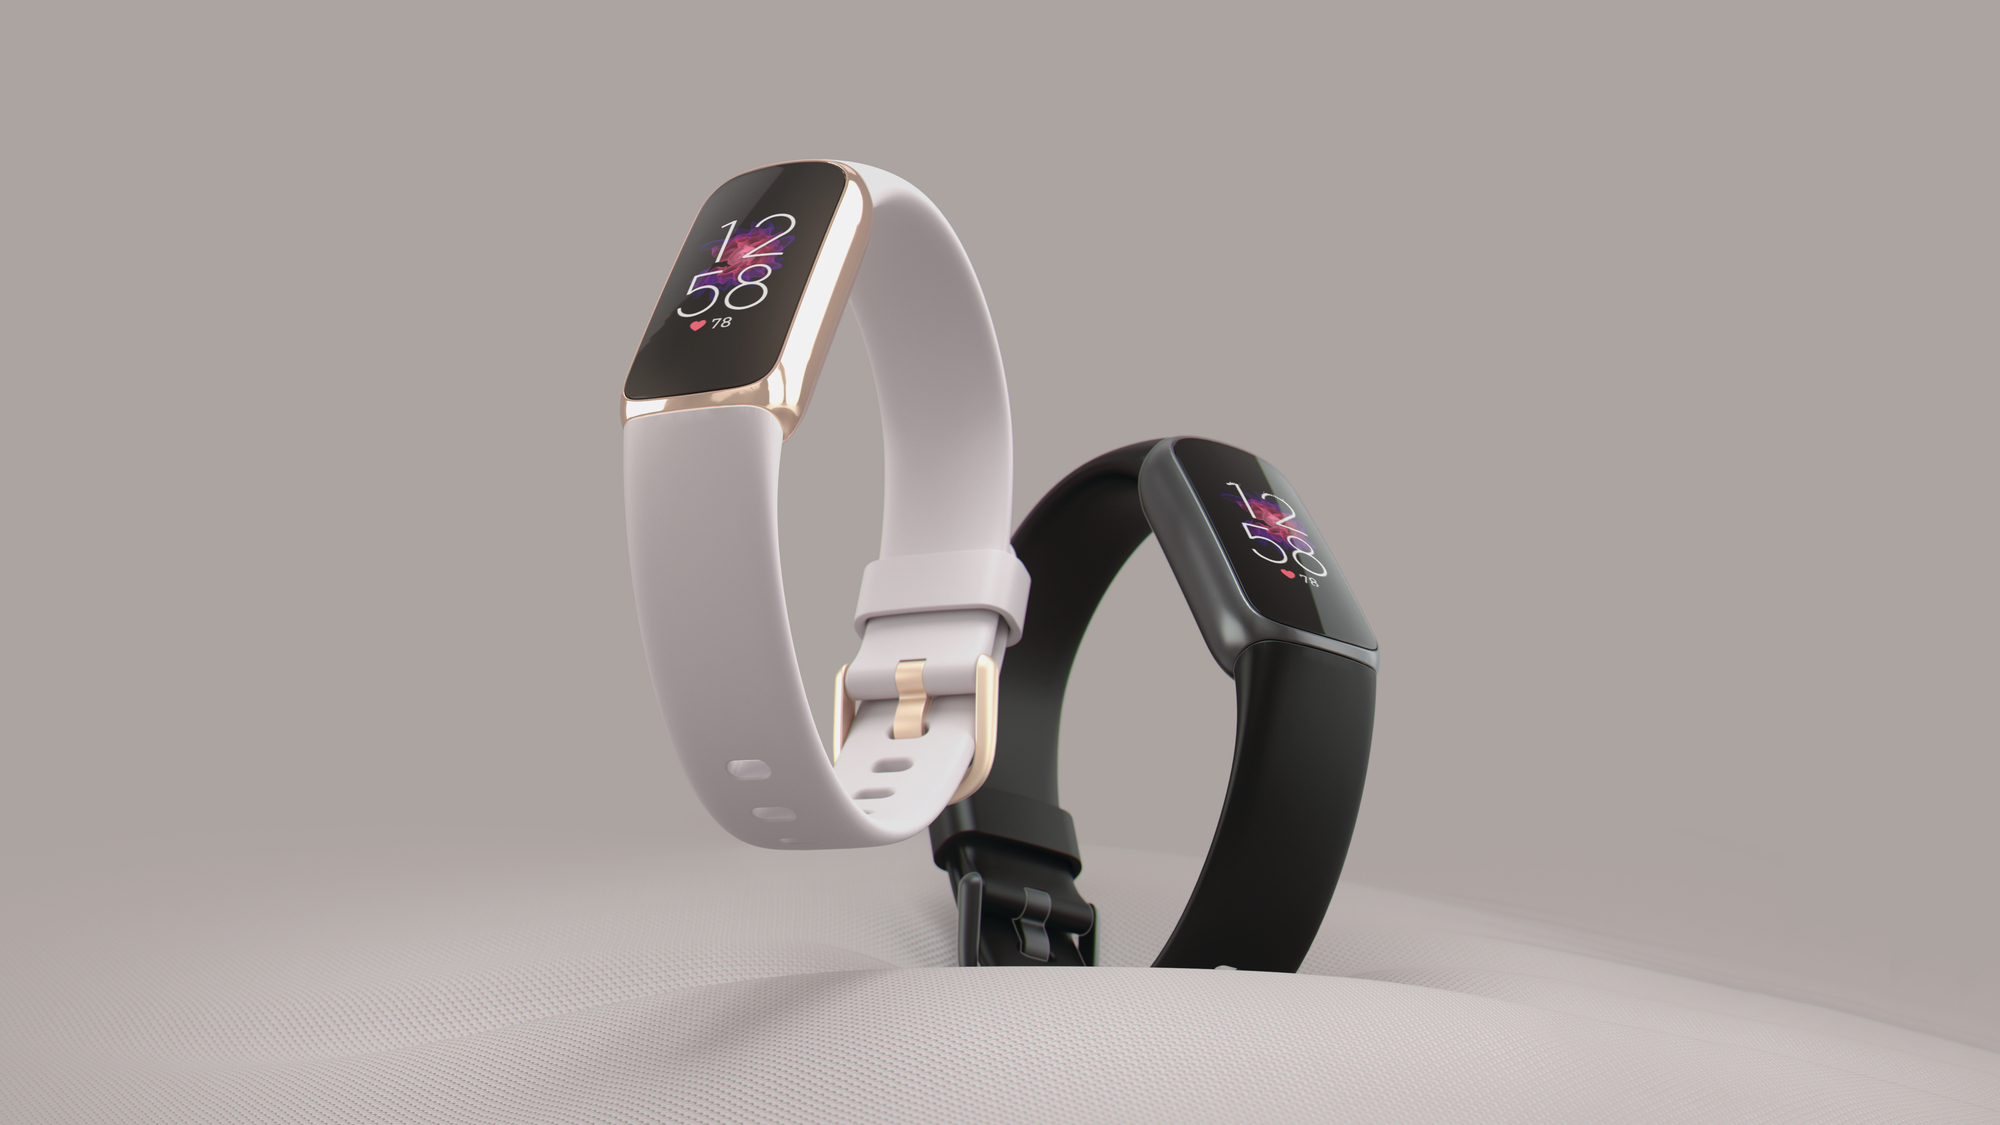 Exciting New Features Coming to Fitbit Luxe and Charge 5 - Fitbit Blog